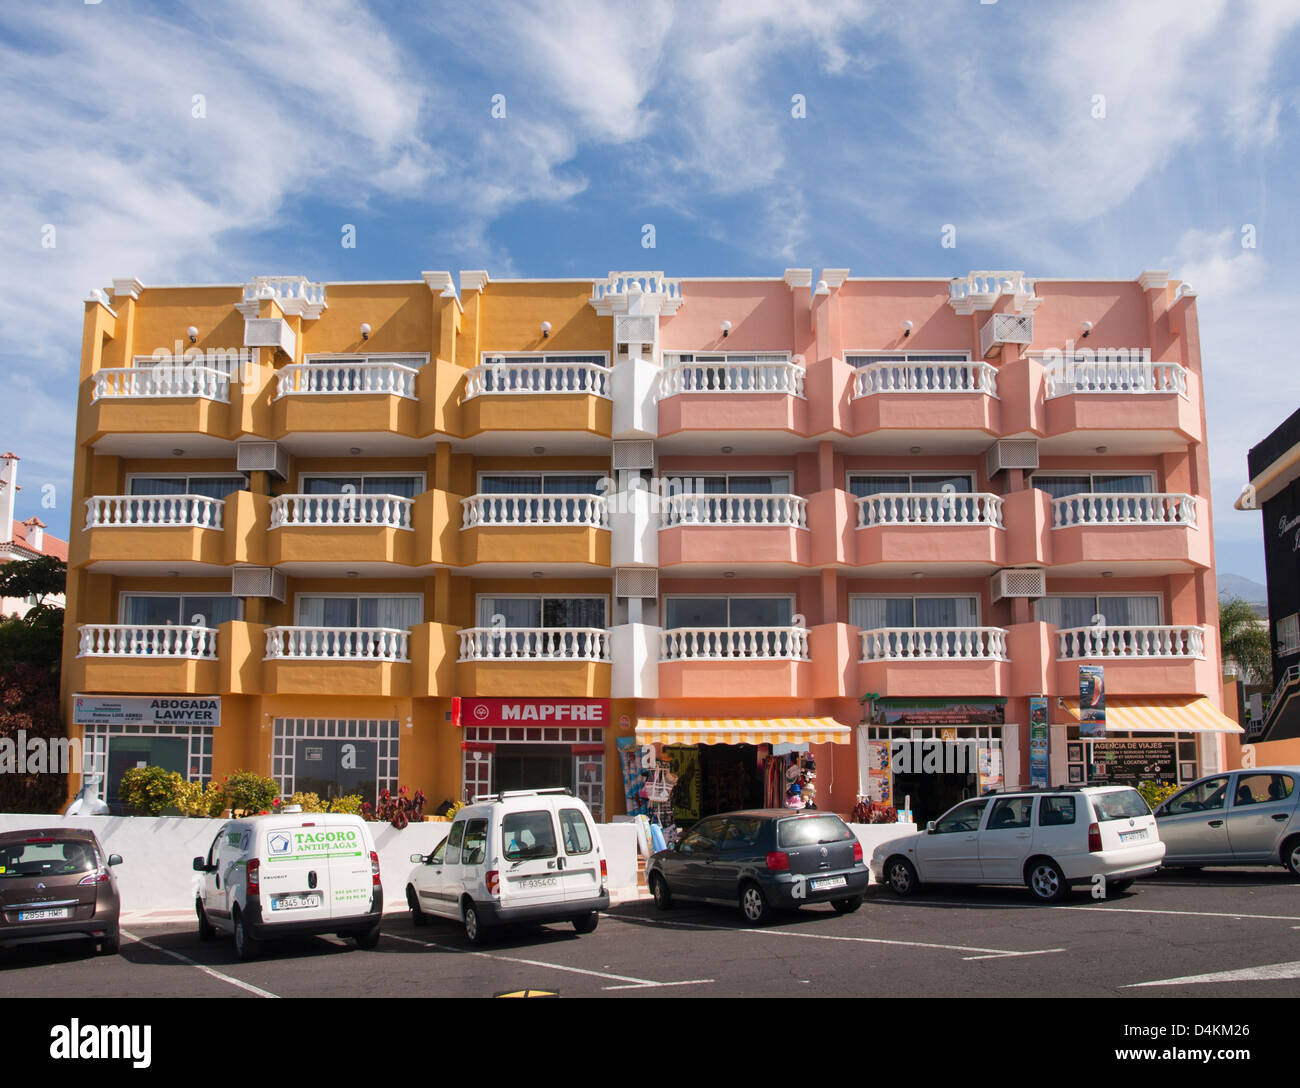 Typical building with holiday apartments and shops on ground floor in Tenerife, Canary Islands Spain Stock Photo